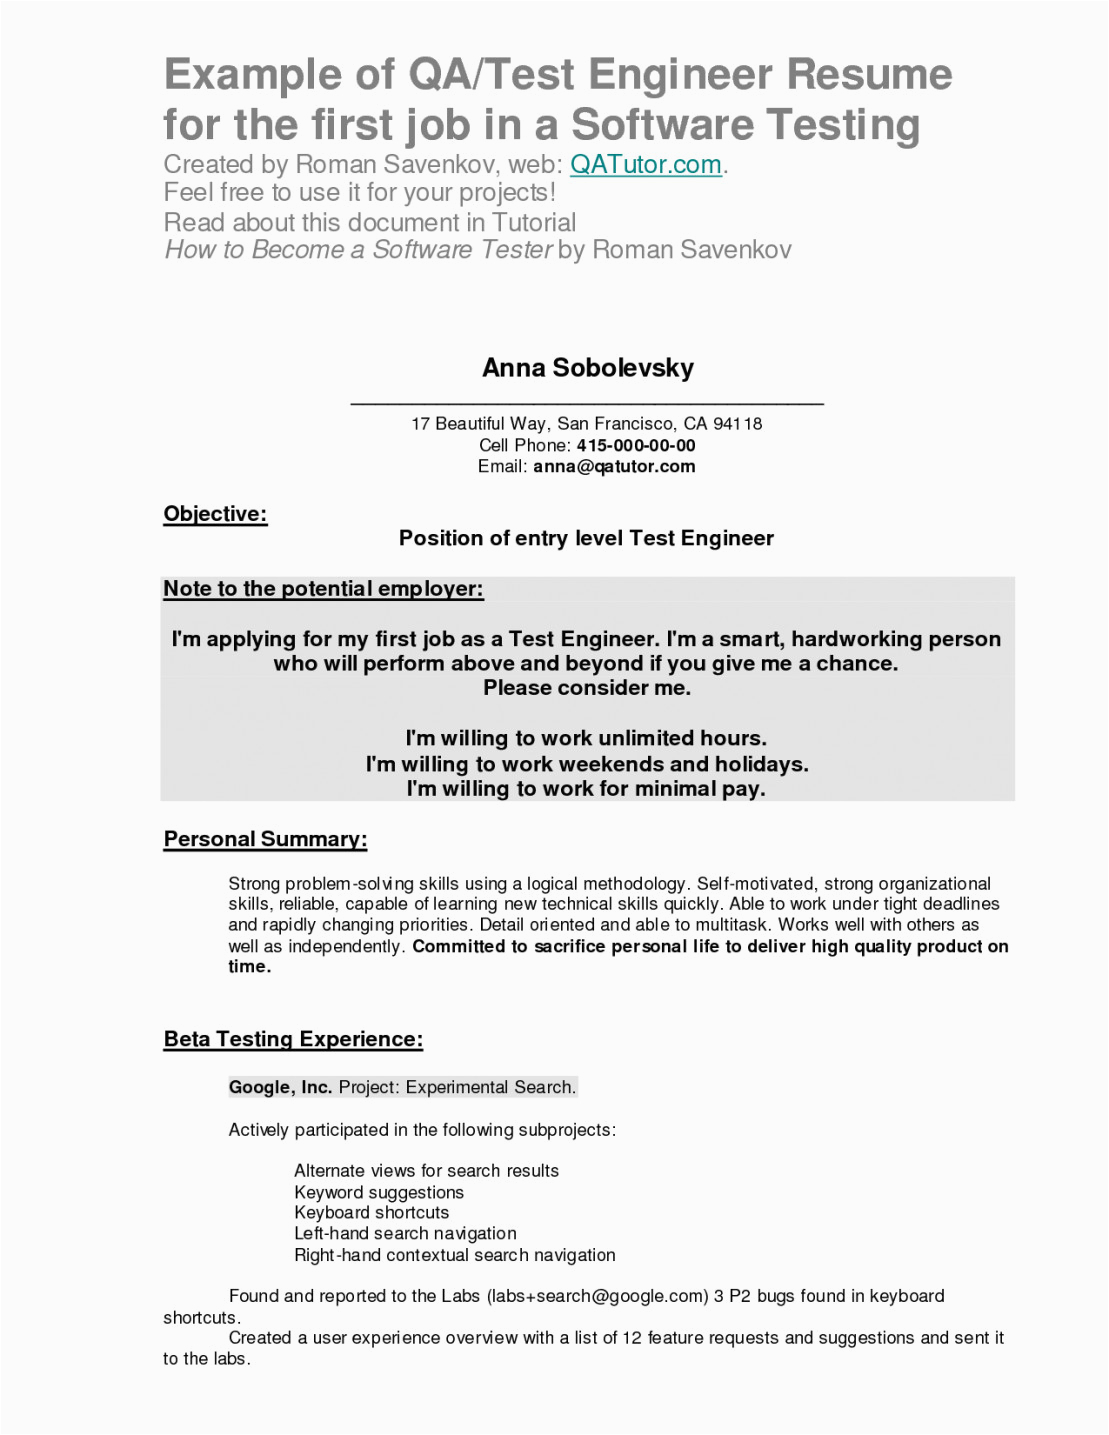 Best Resume Template for First Job First Job Resume